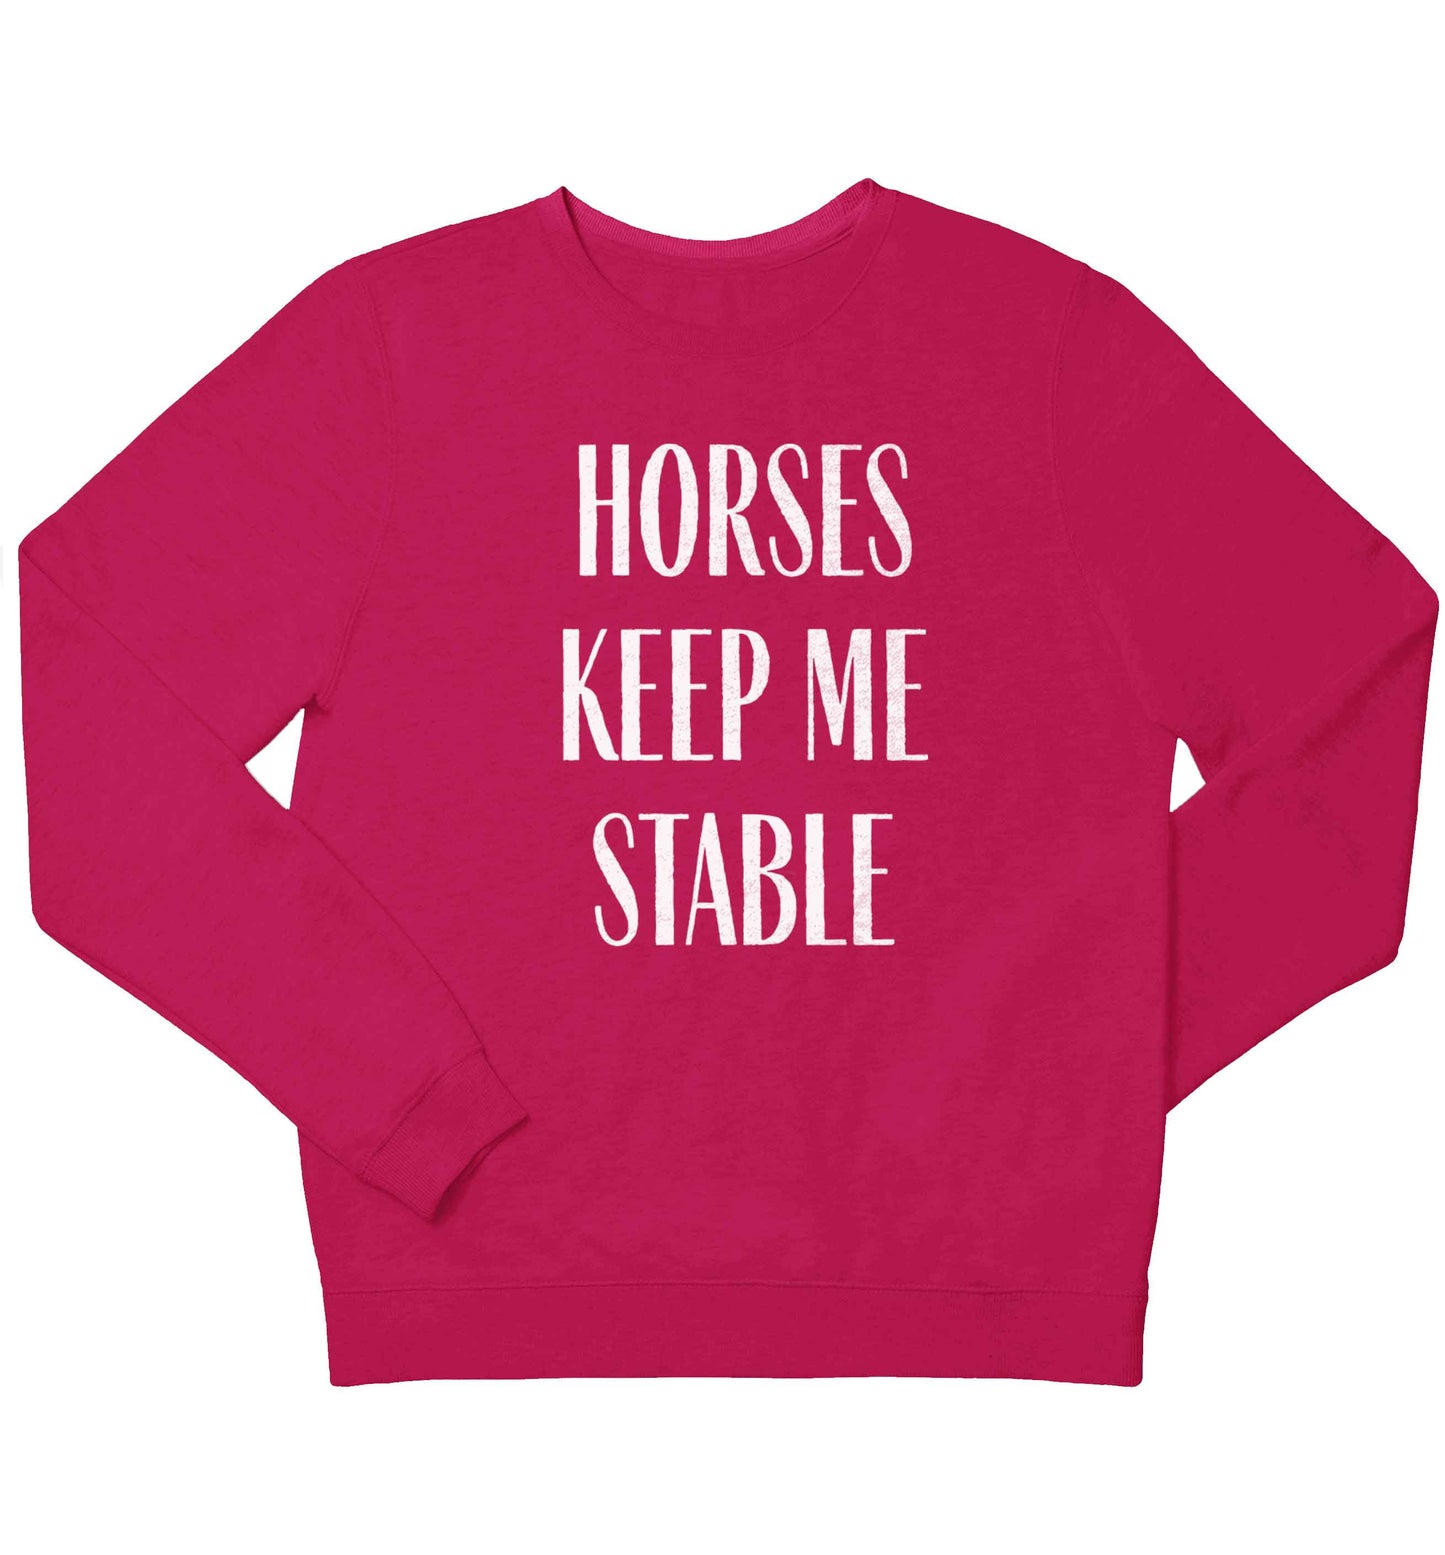 Horses keep me stable children's pink sweater 12-13 Years